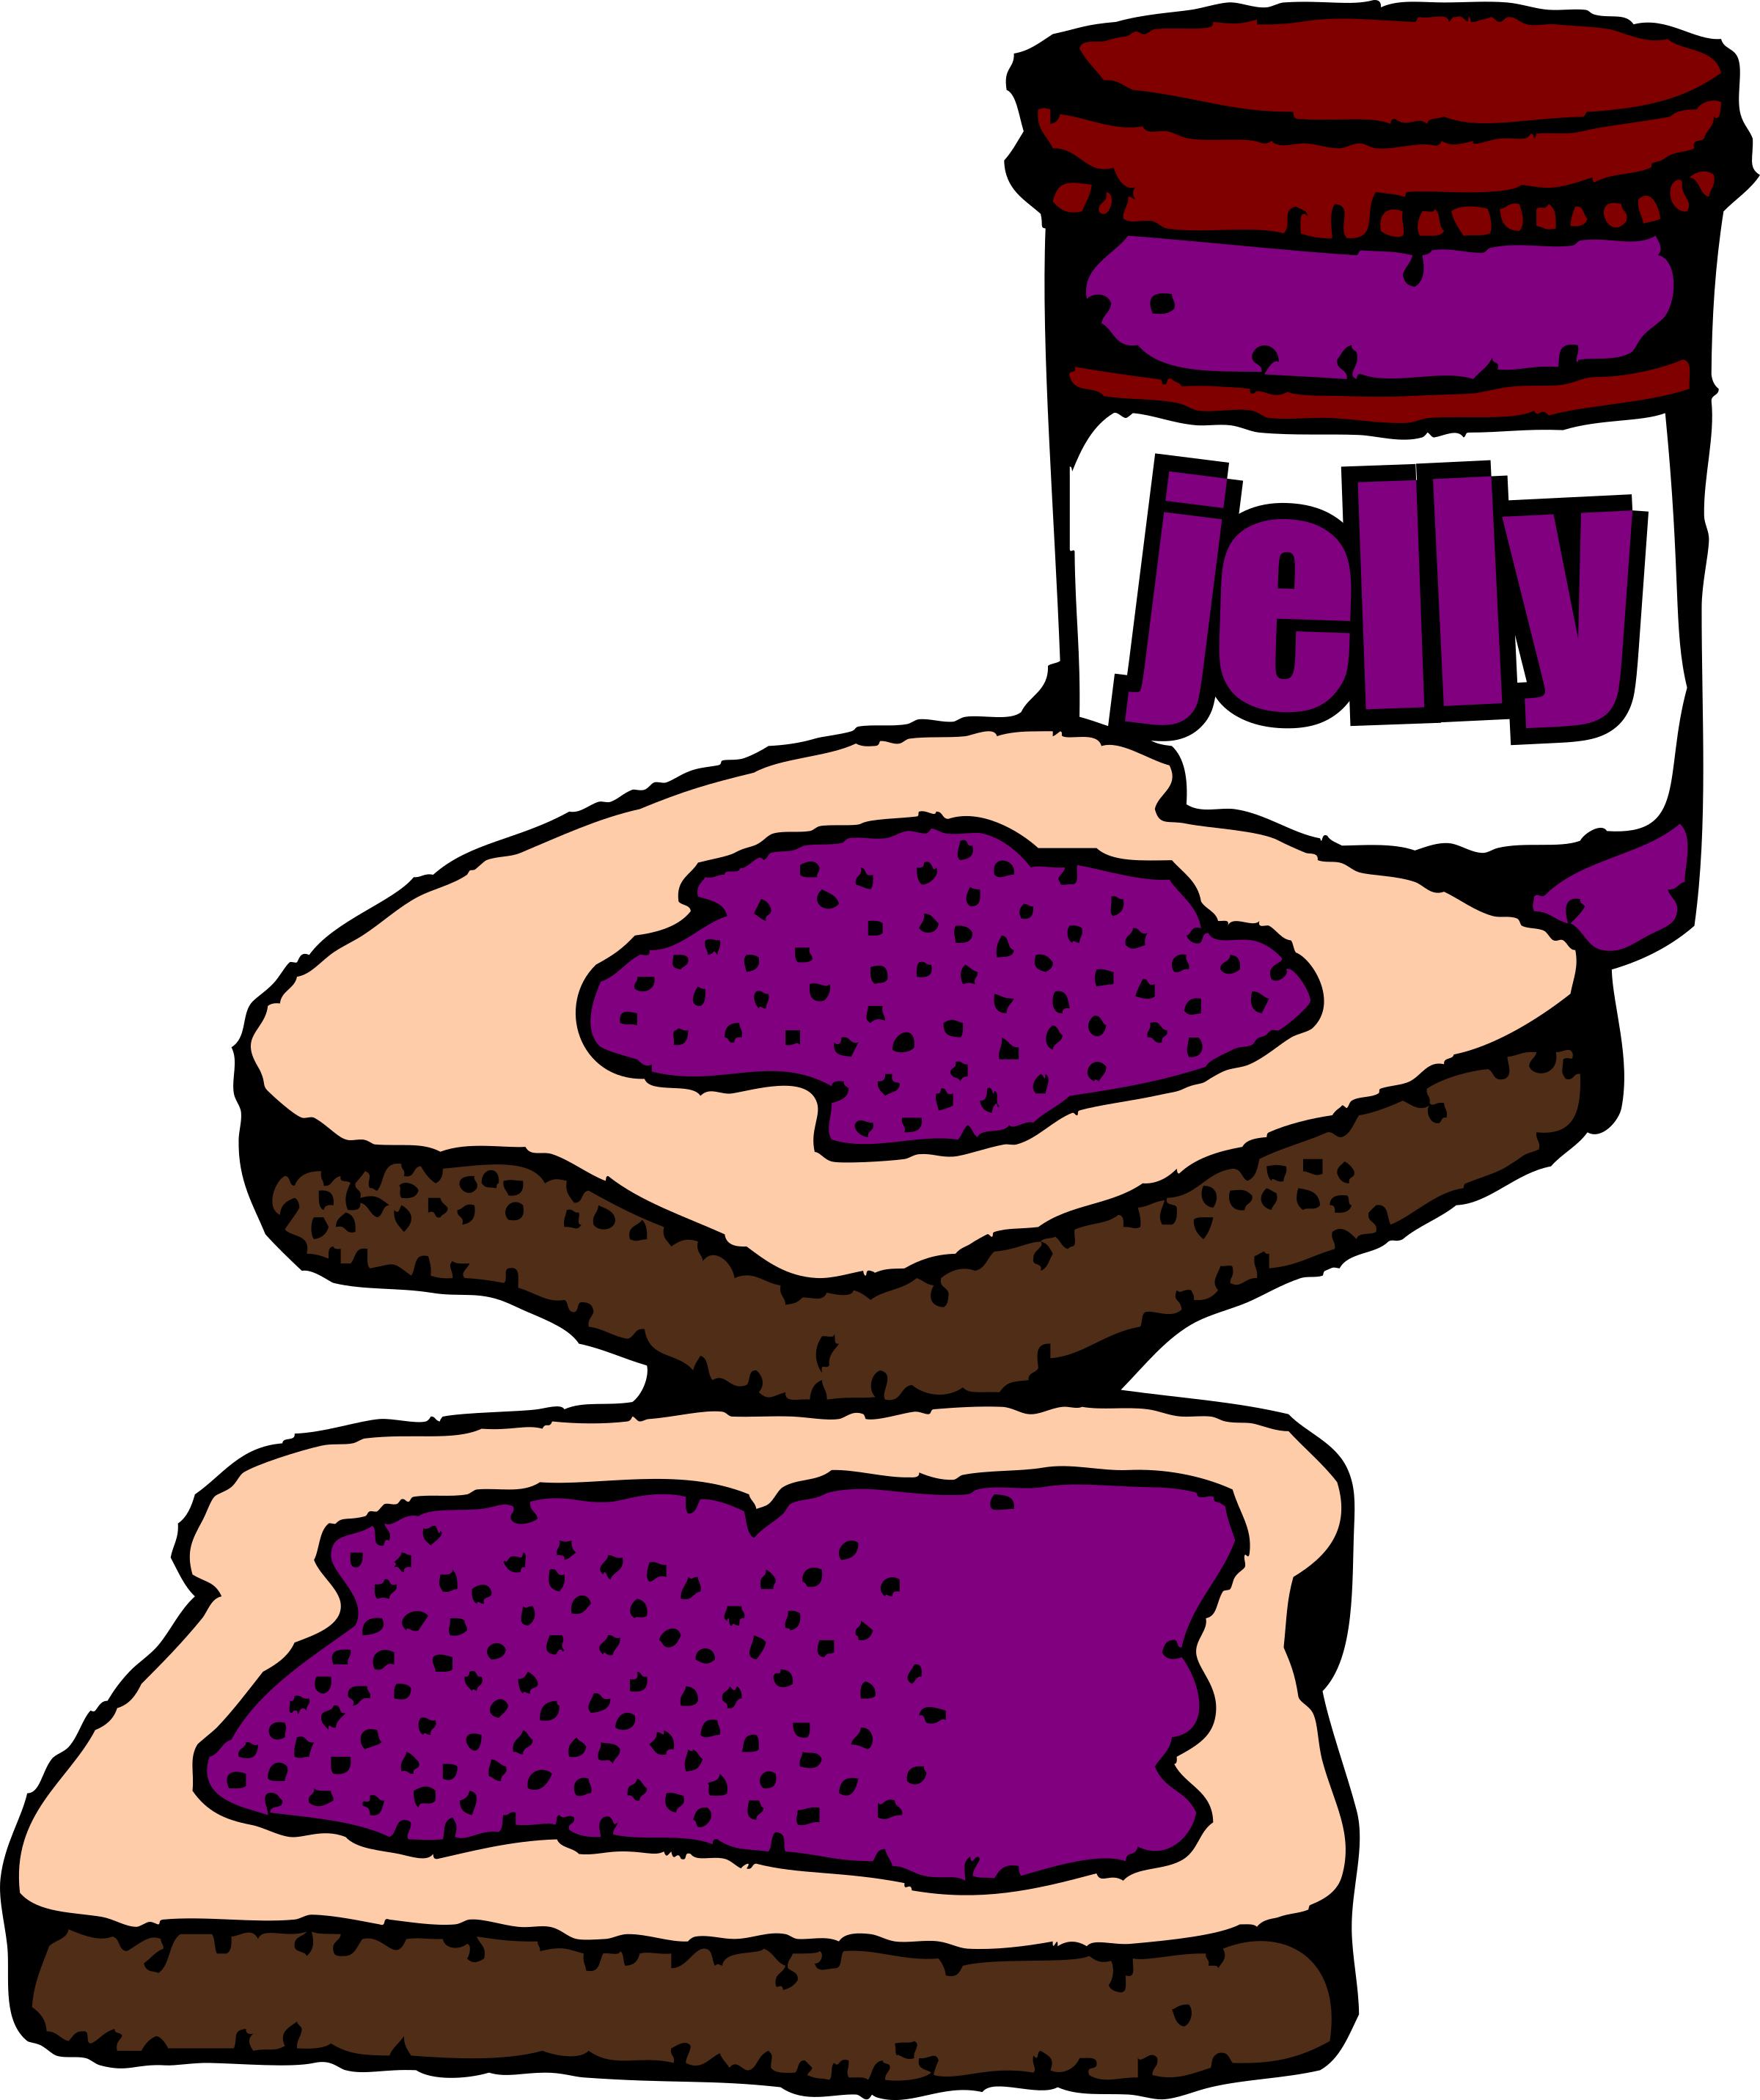 Colorized Peanut butter and jelly sandwich with label png